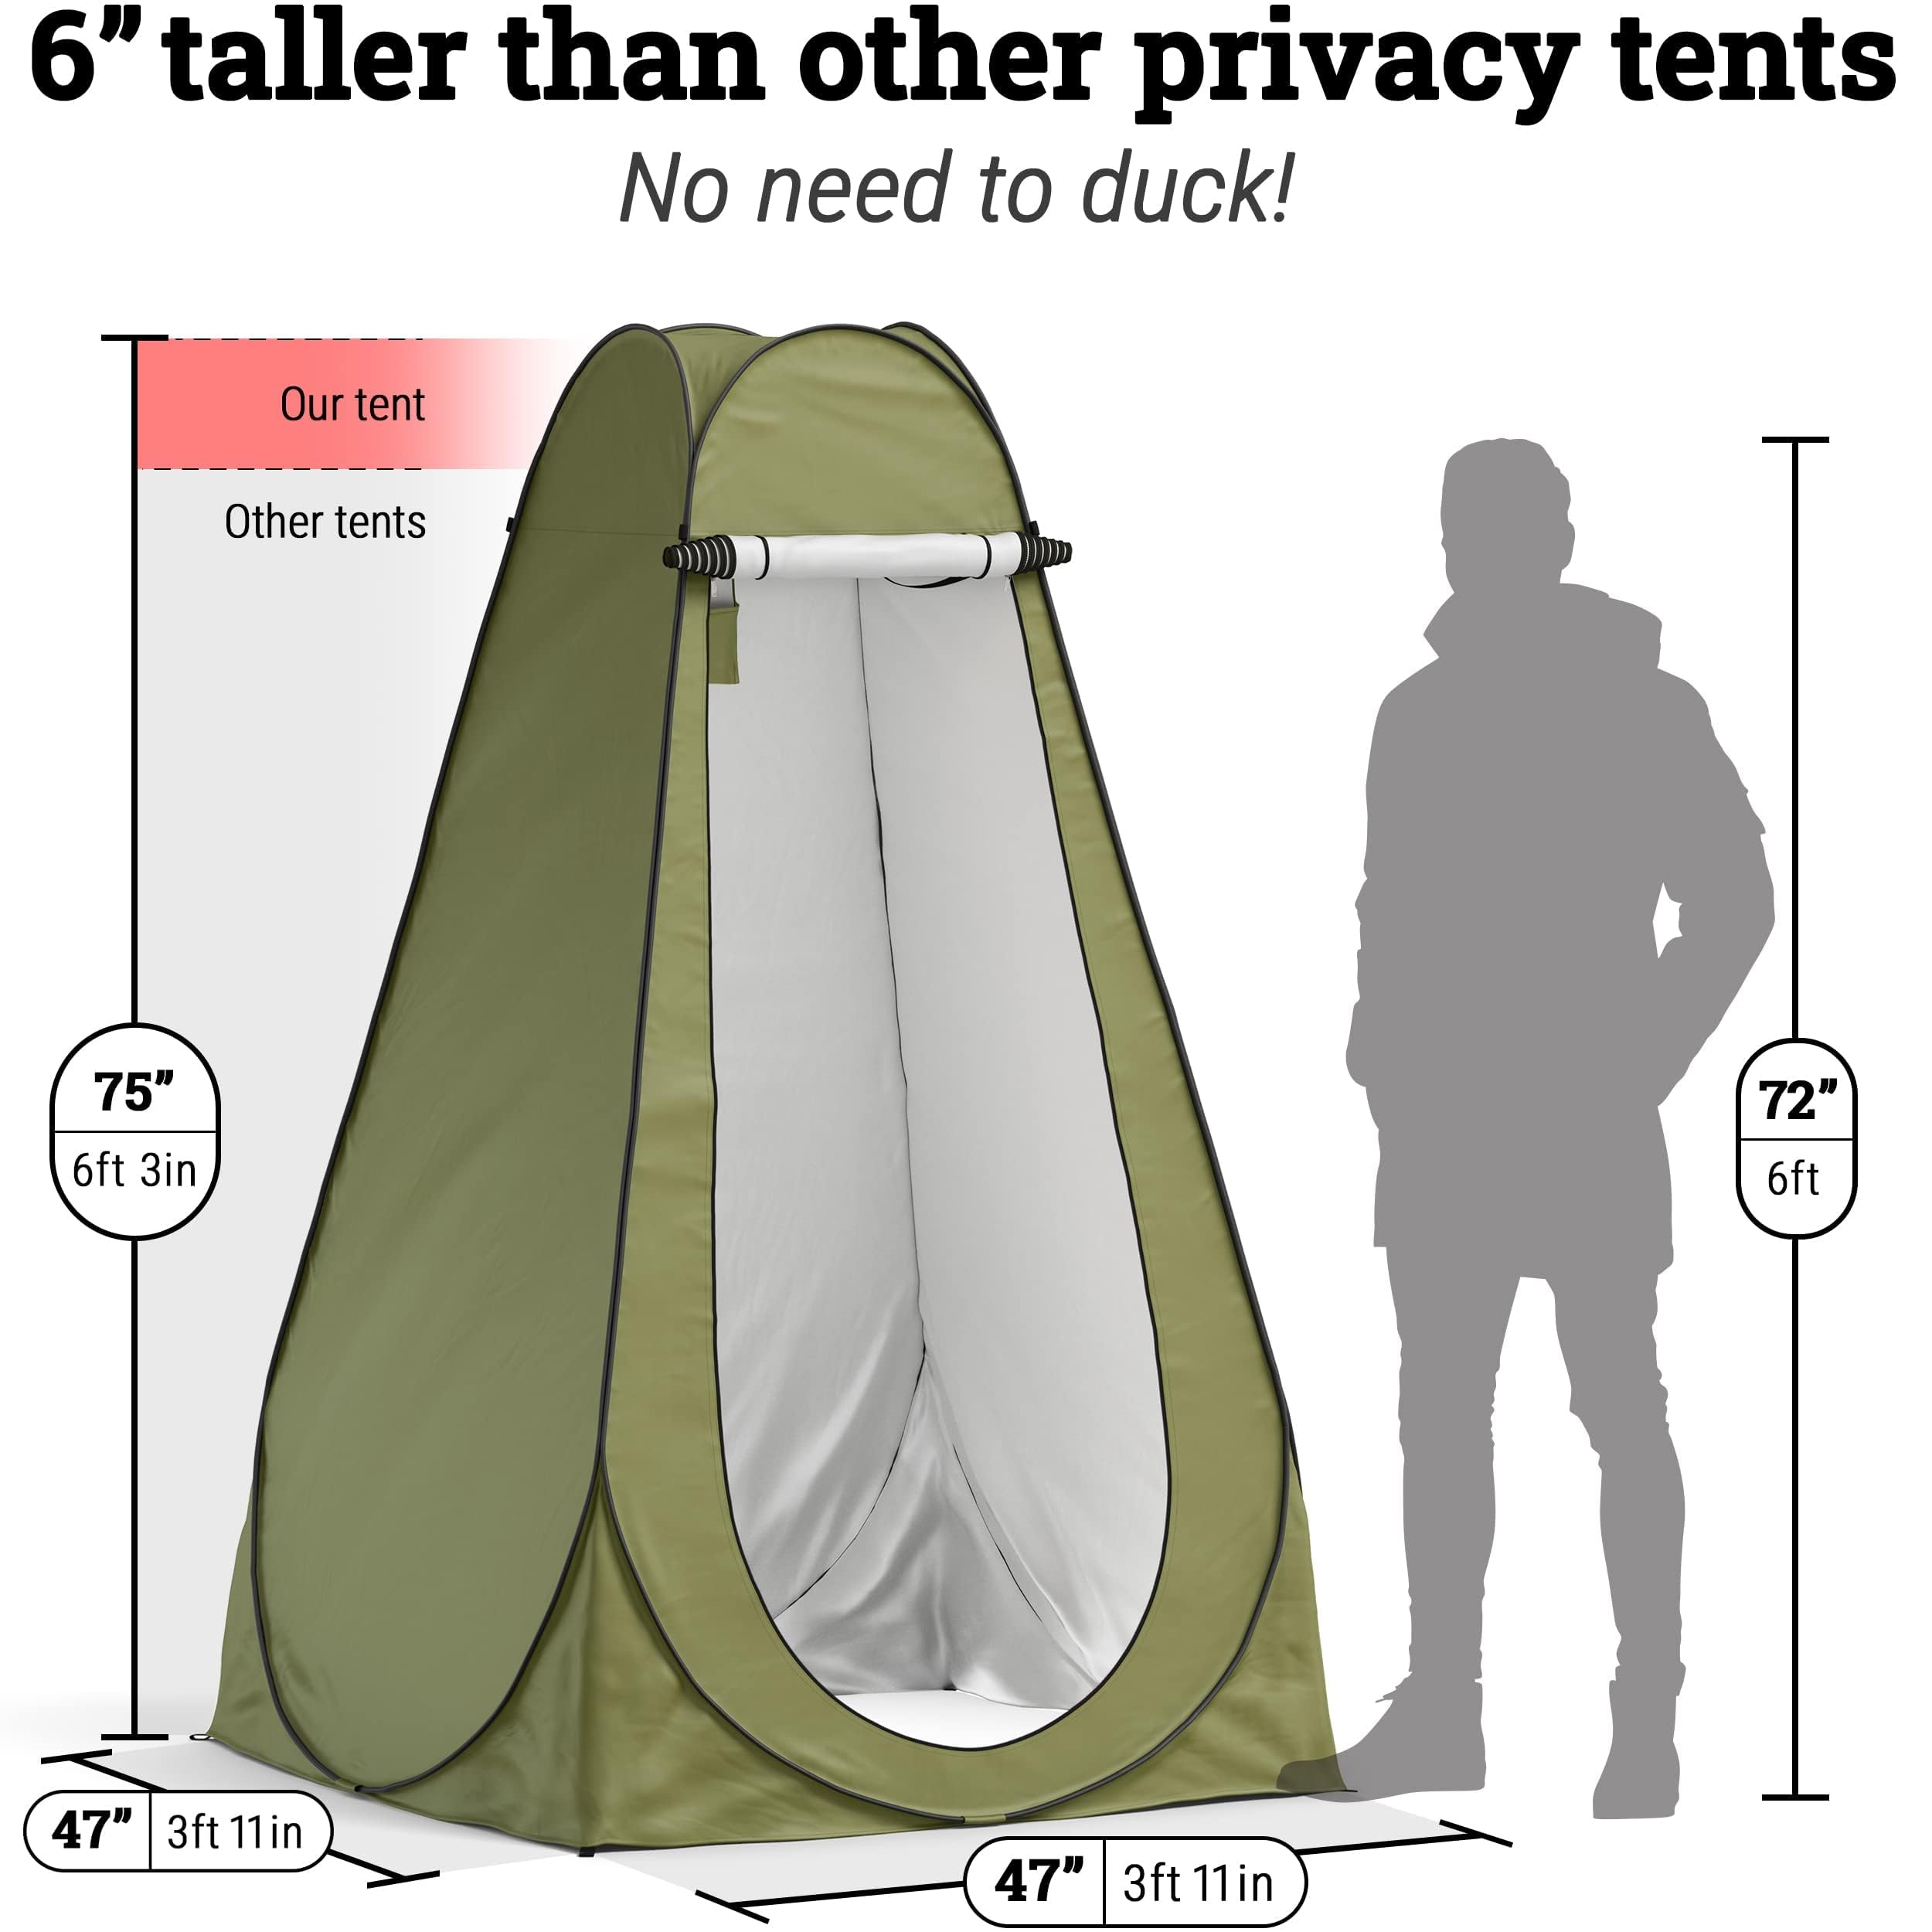 ABCO Pop Up Privacy Tent Instant Portable Outdoor Shower Tent, Camp Toilet, Changing Room, Rain Shelter with Window for Beach Easy Set Up, Foldable with Carry Bag, Lightweight and Sturdy - Pop Up Pod  - Very Good